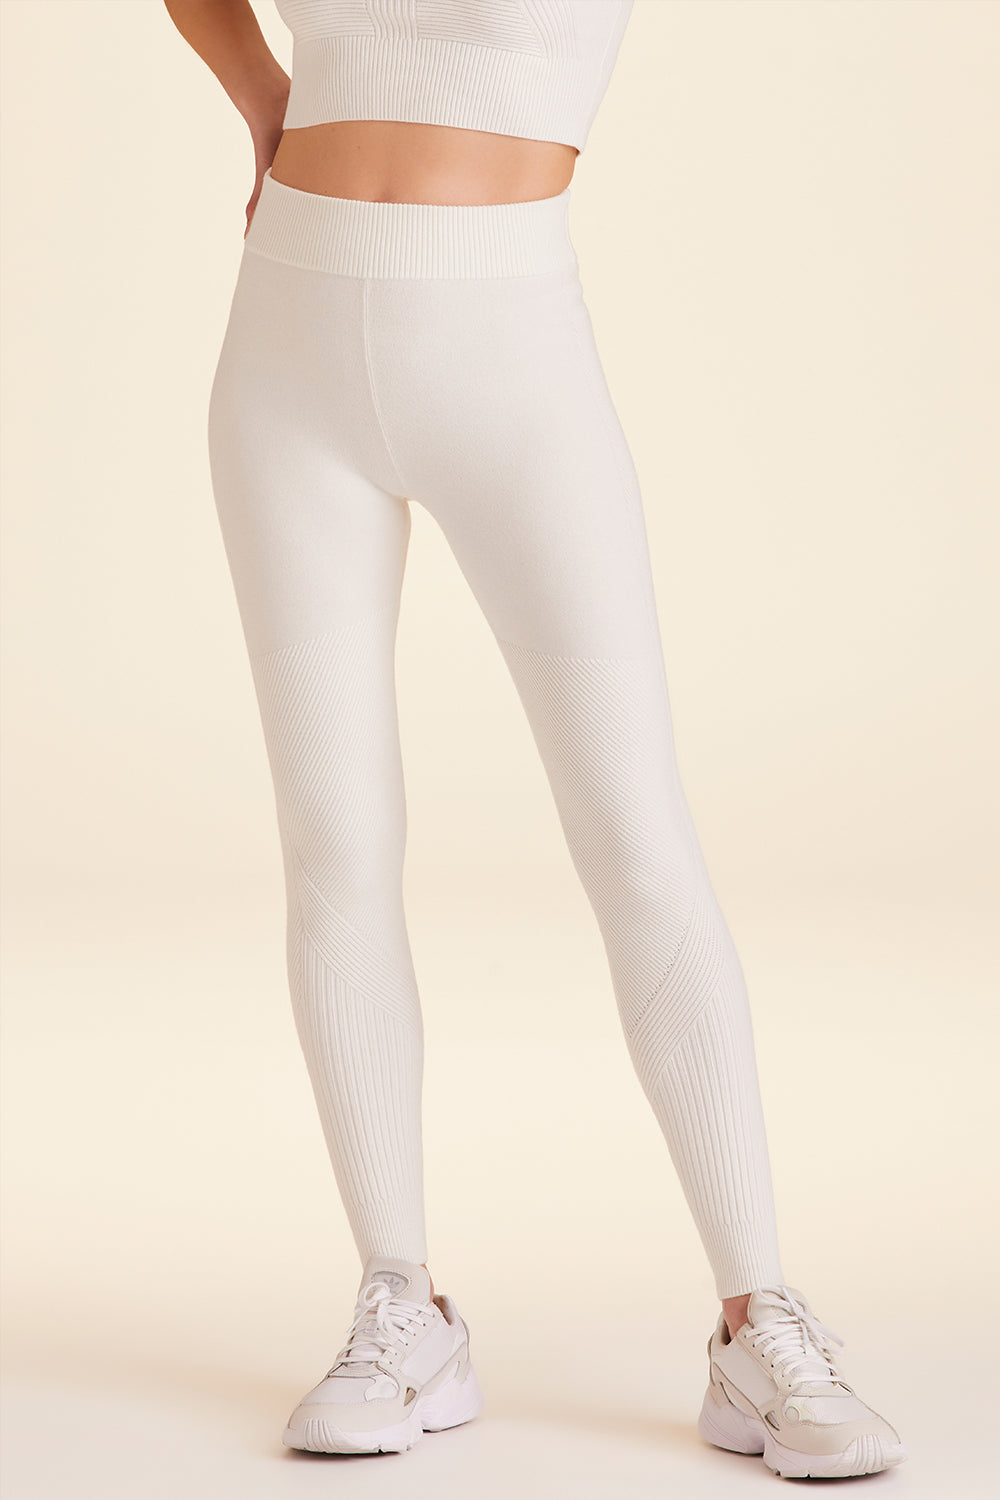 TOG24 Meru Cashmere Touch Base Layer Leggings Off White